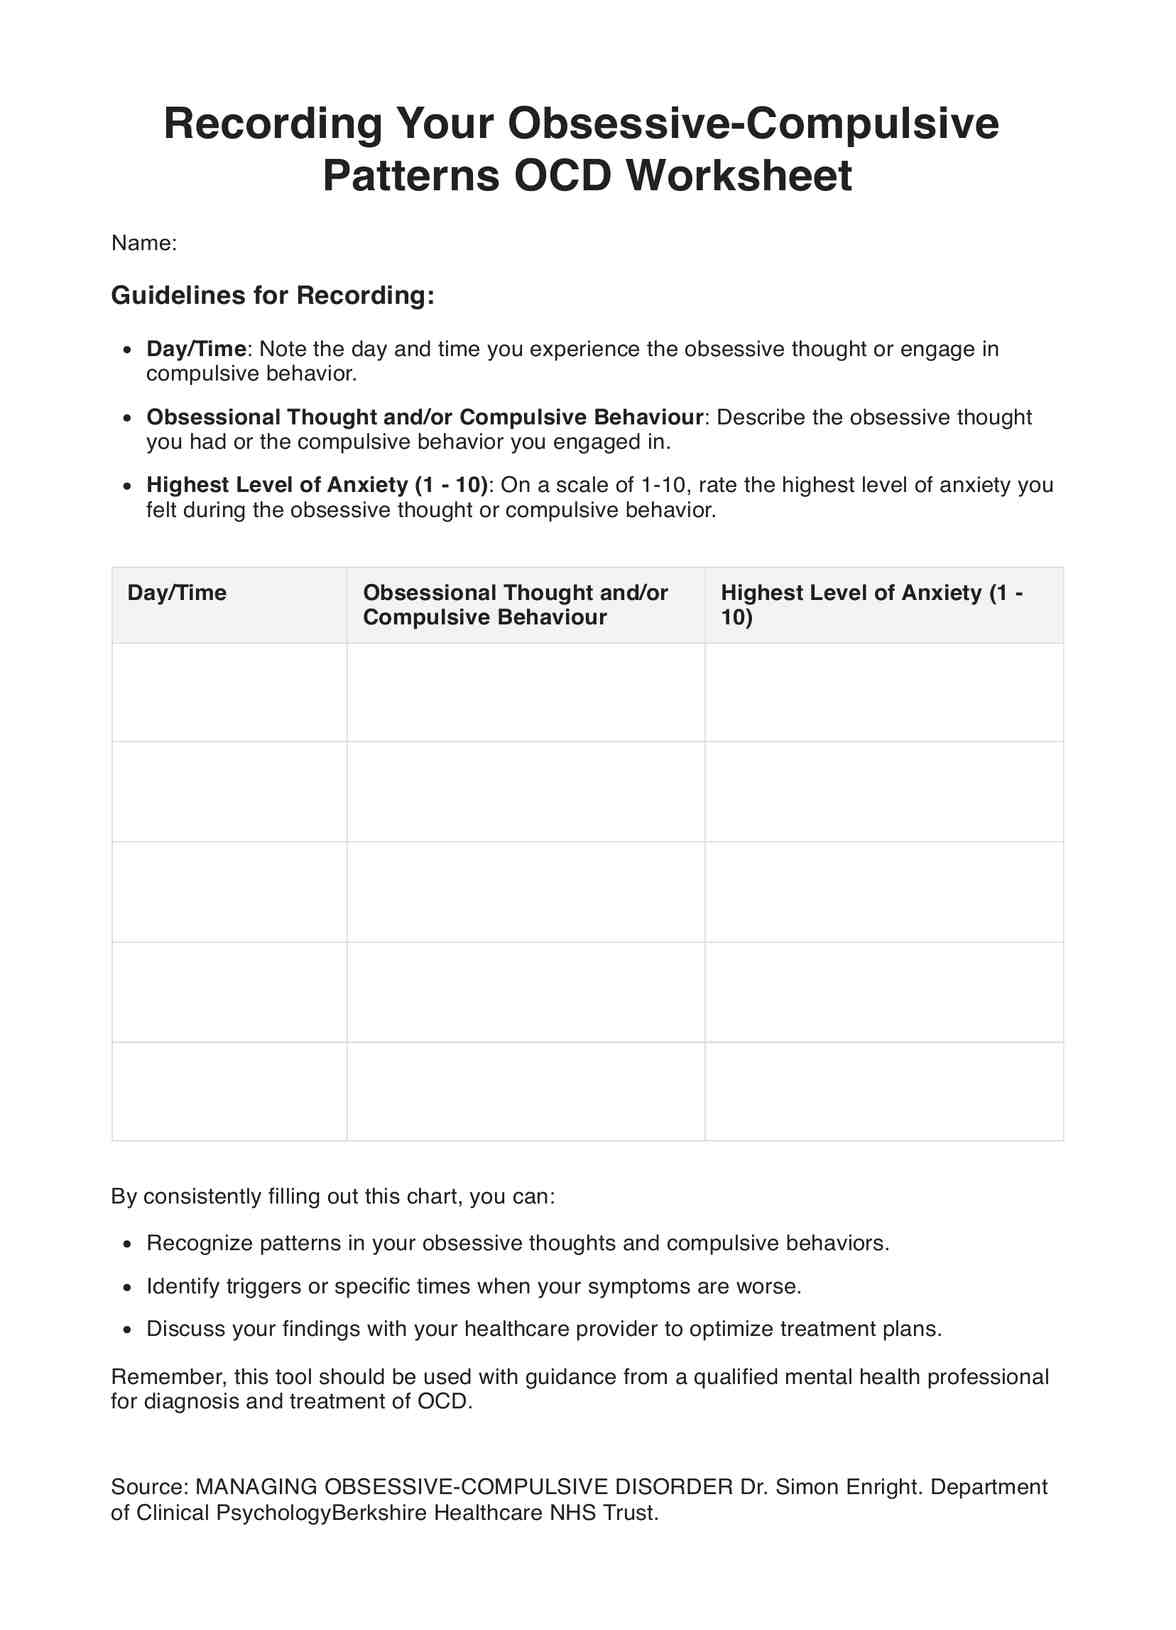 Recording Your Obsessive-Compulsive Patterns OCD Worksheet PDF Example